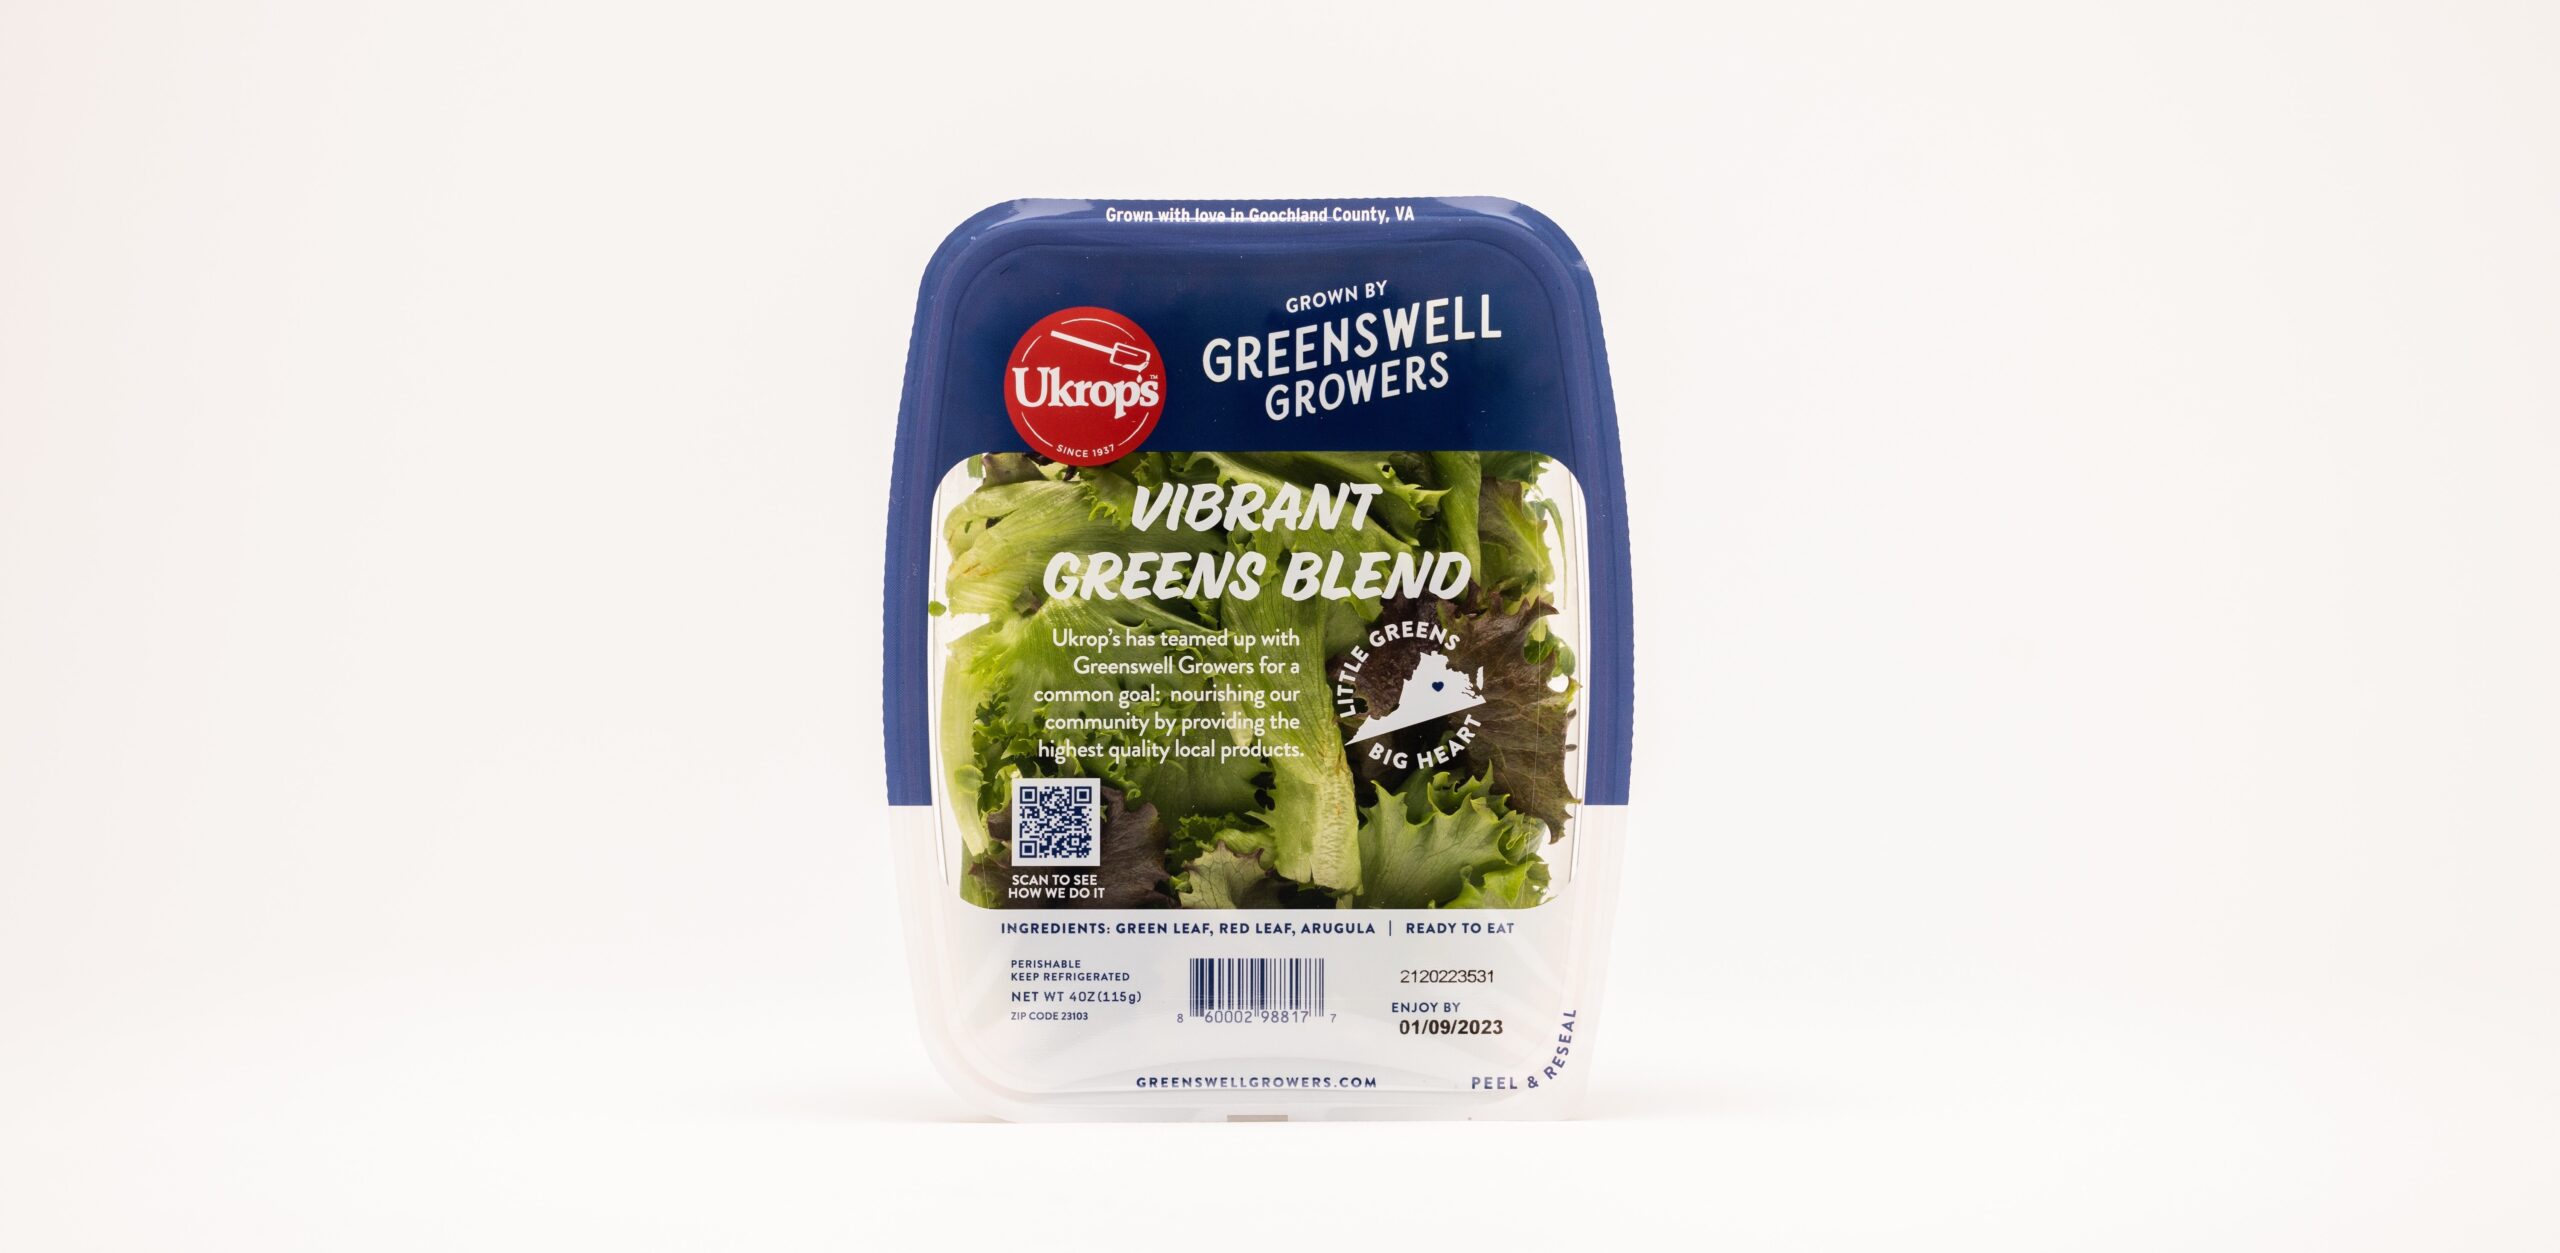 greenswell growers ukrops product scaled